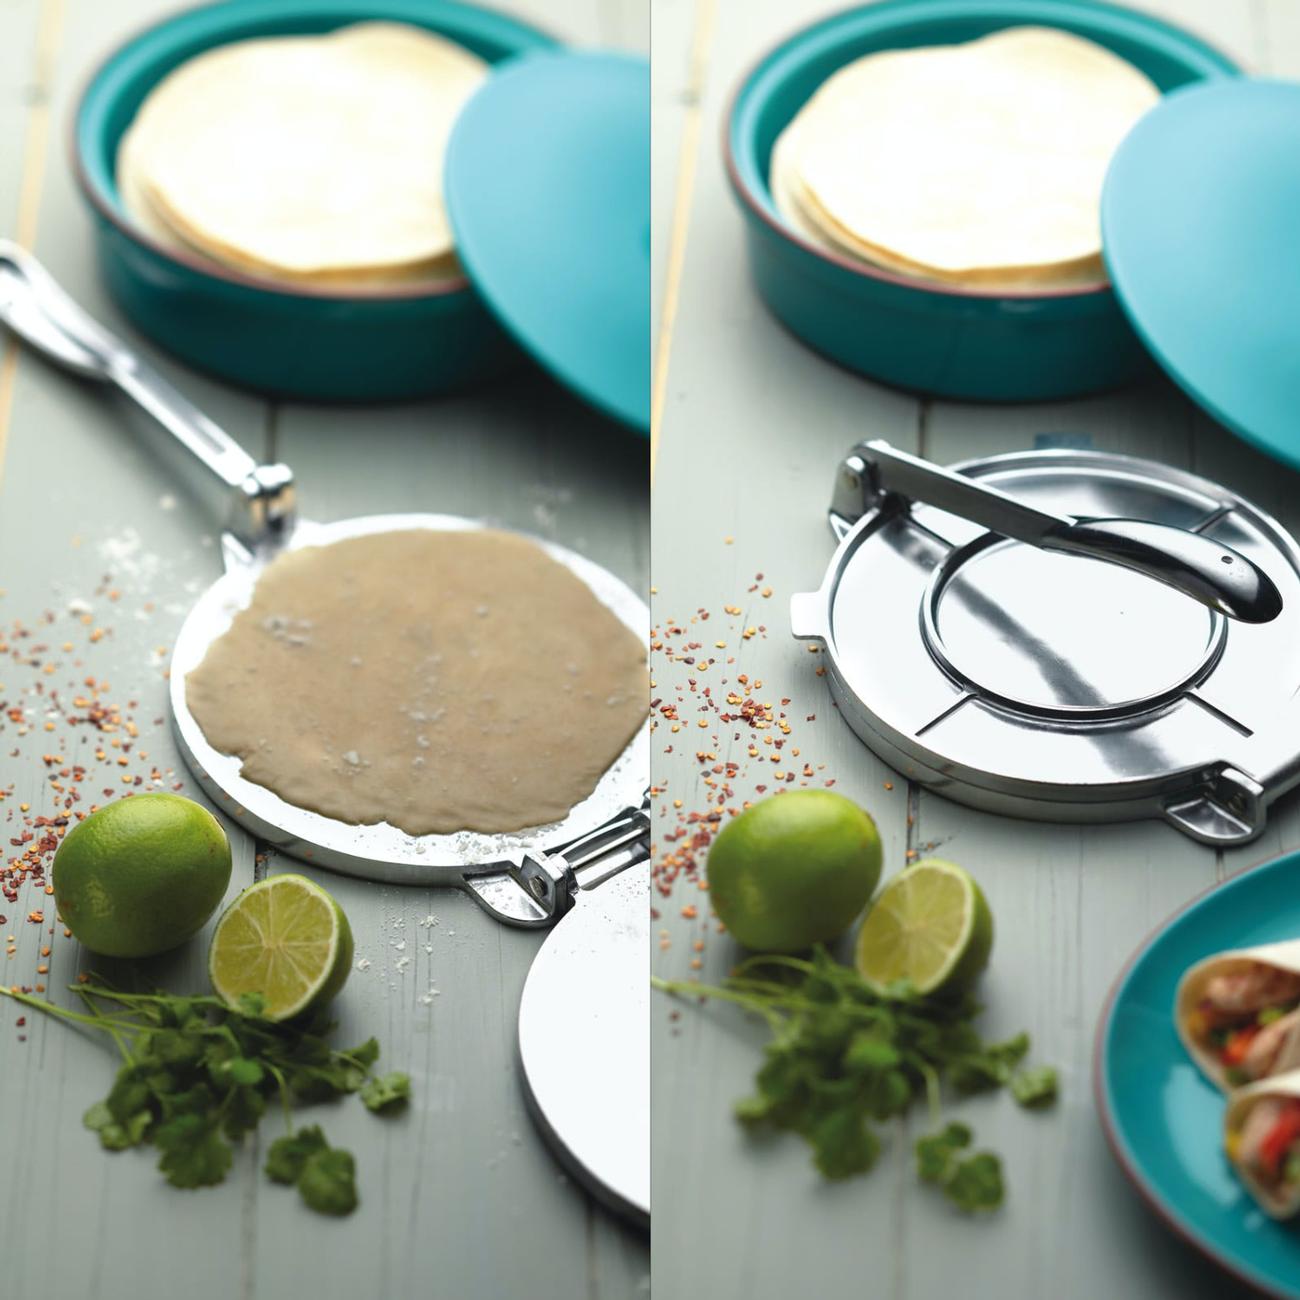 KitchenCraft World of Flavours Mexican Tortilla Press